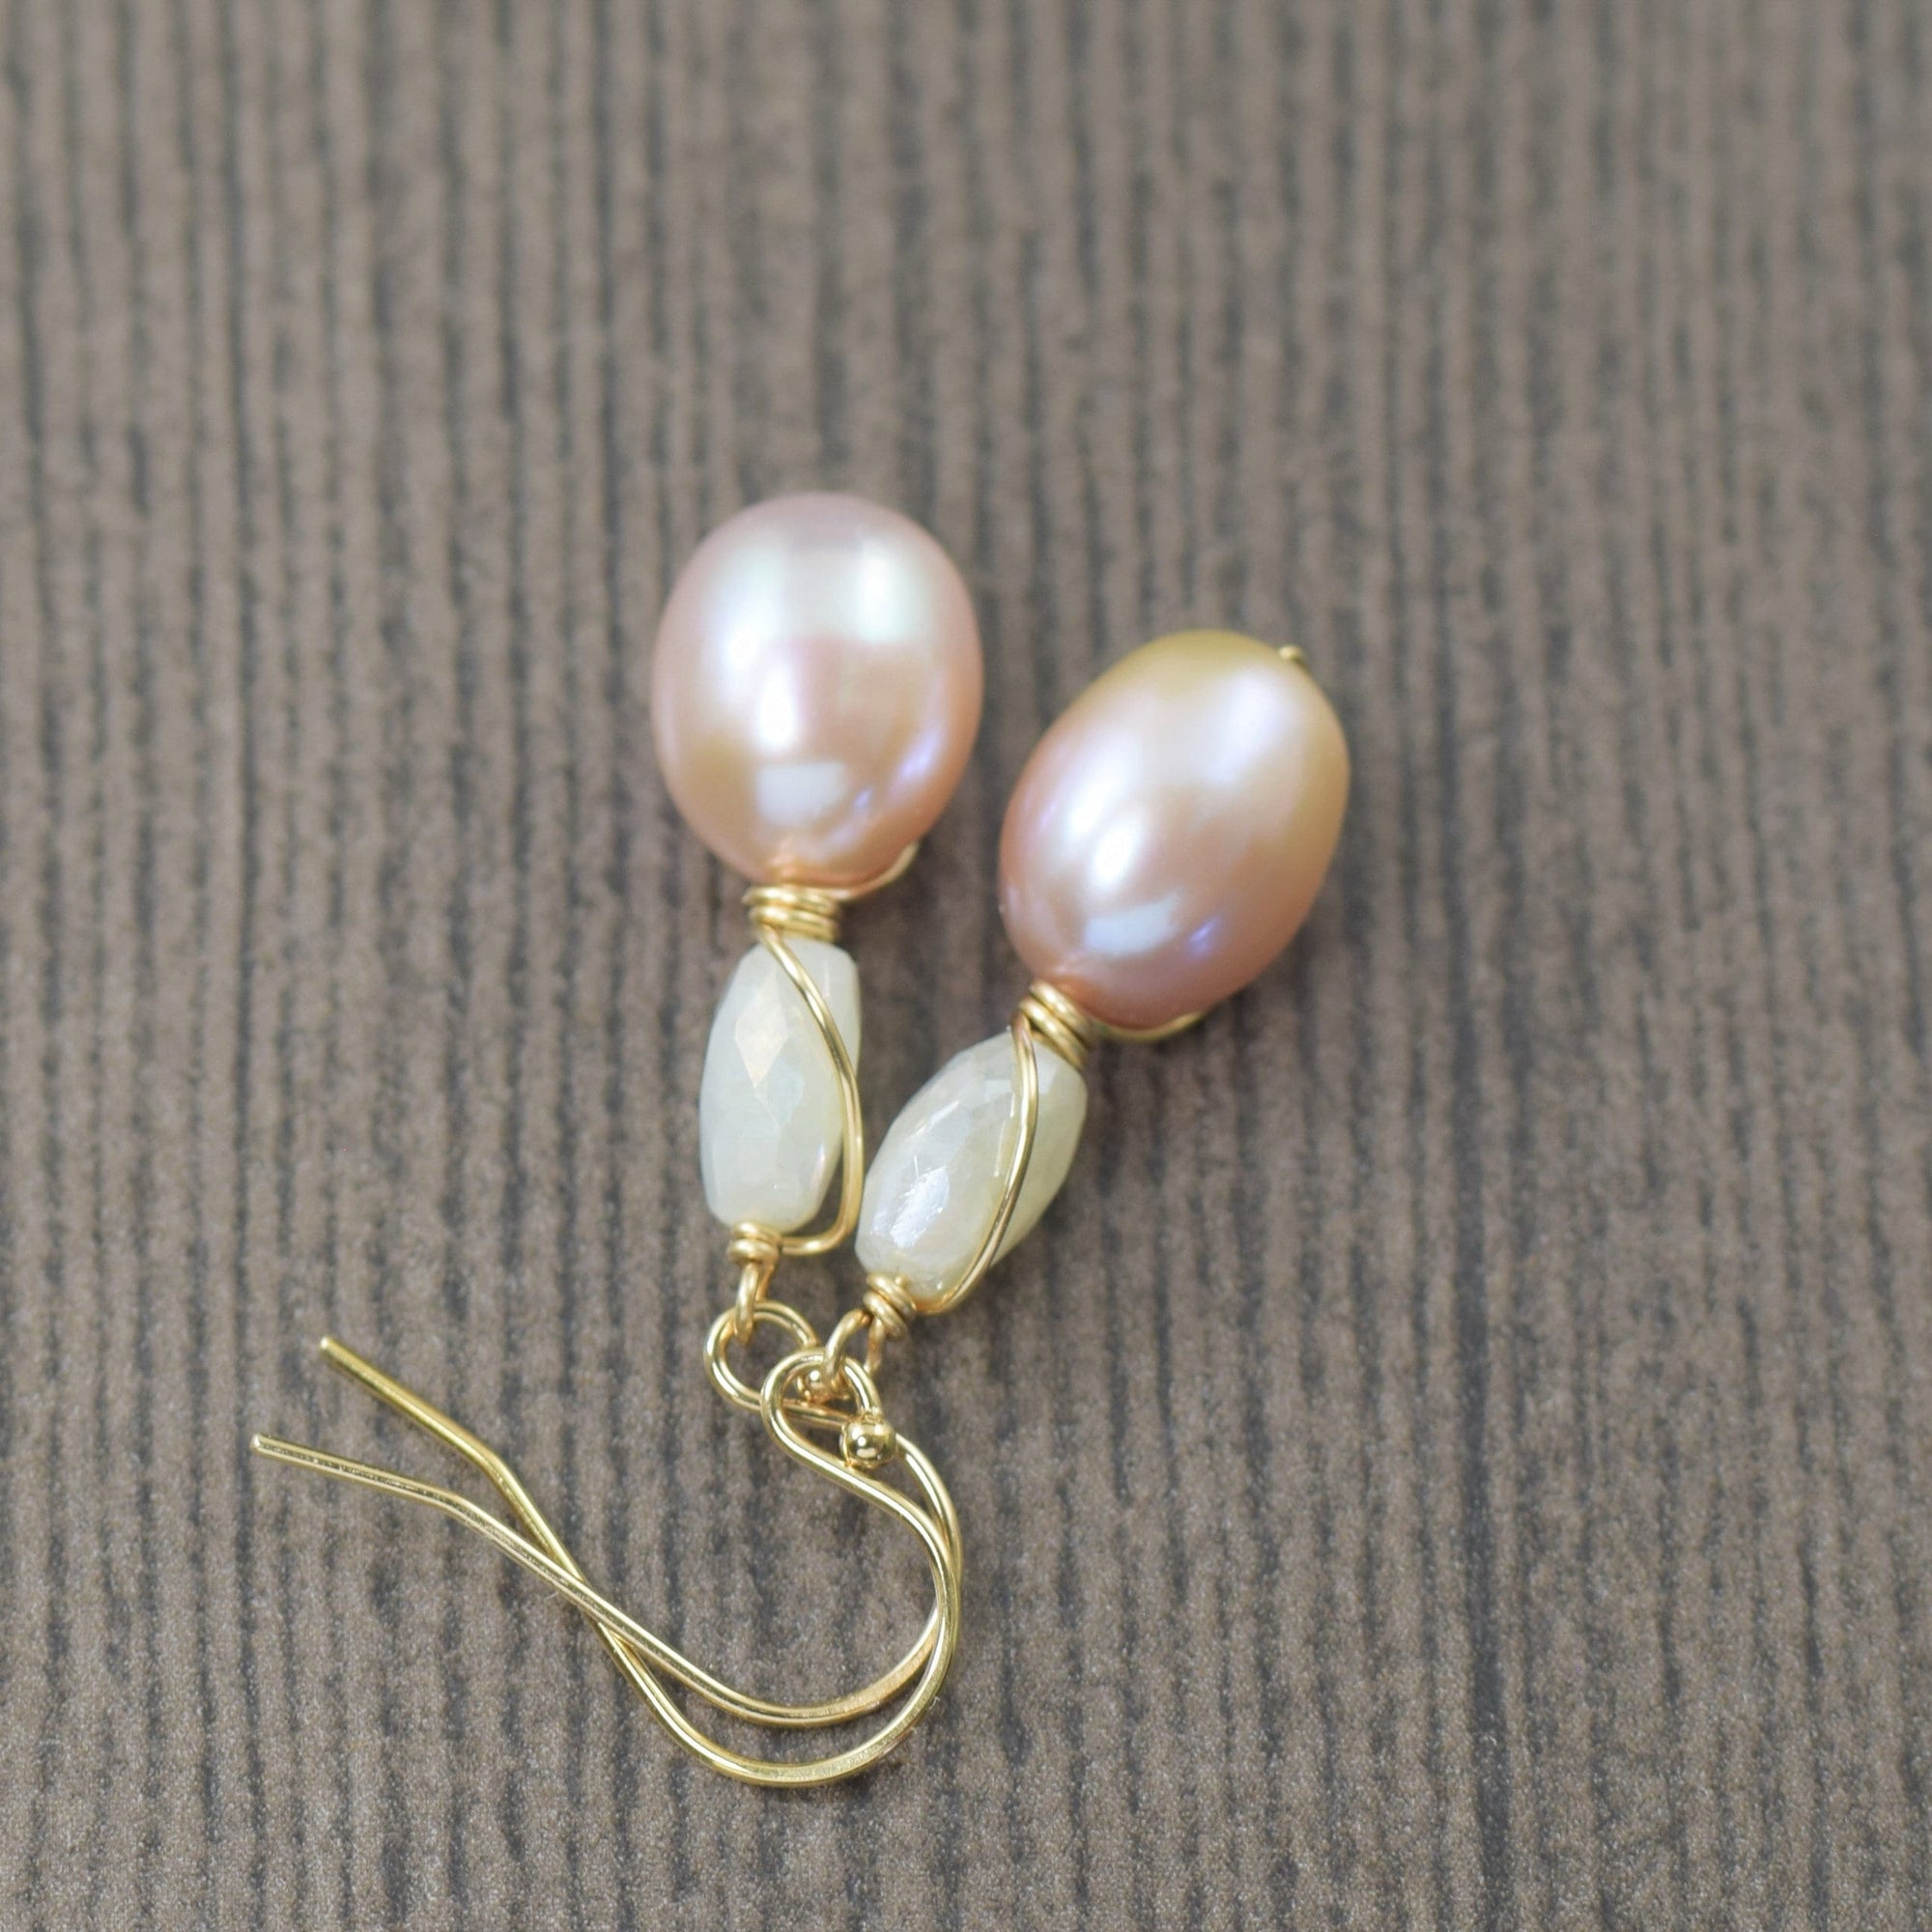 Light pink pearl earrings wire wrapped in gold filled with silverite ...